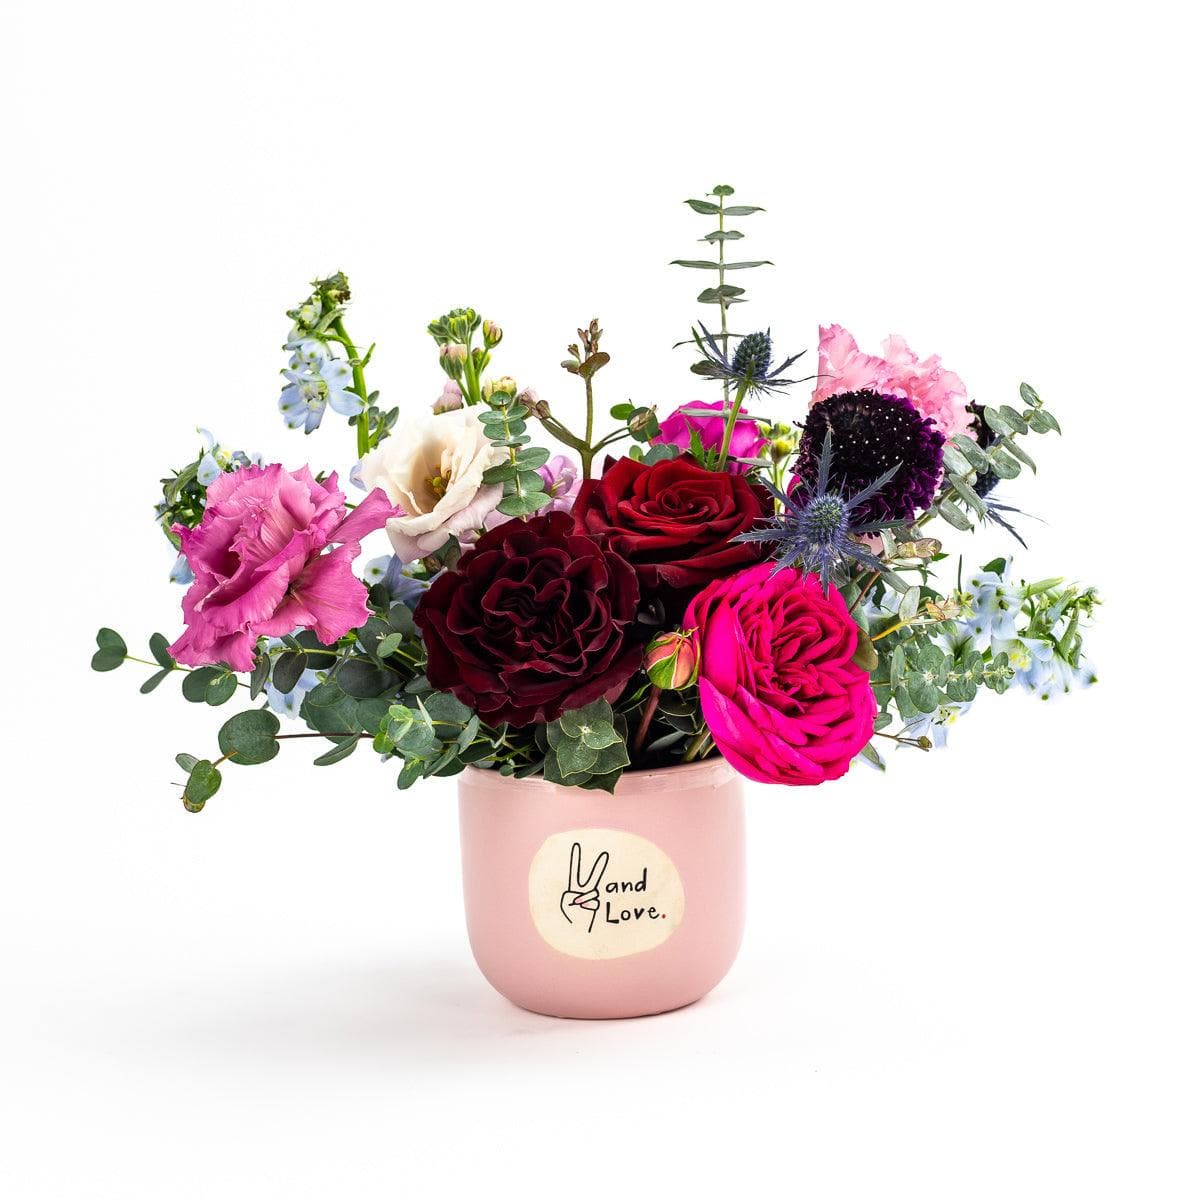 Shop Peace + Love Floral online from Green Fresh Florals + Plants